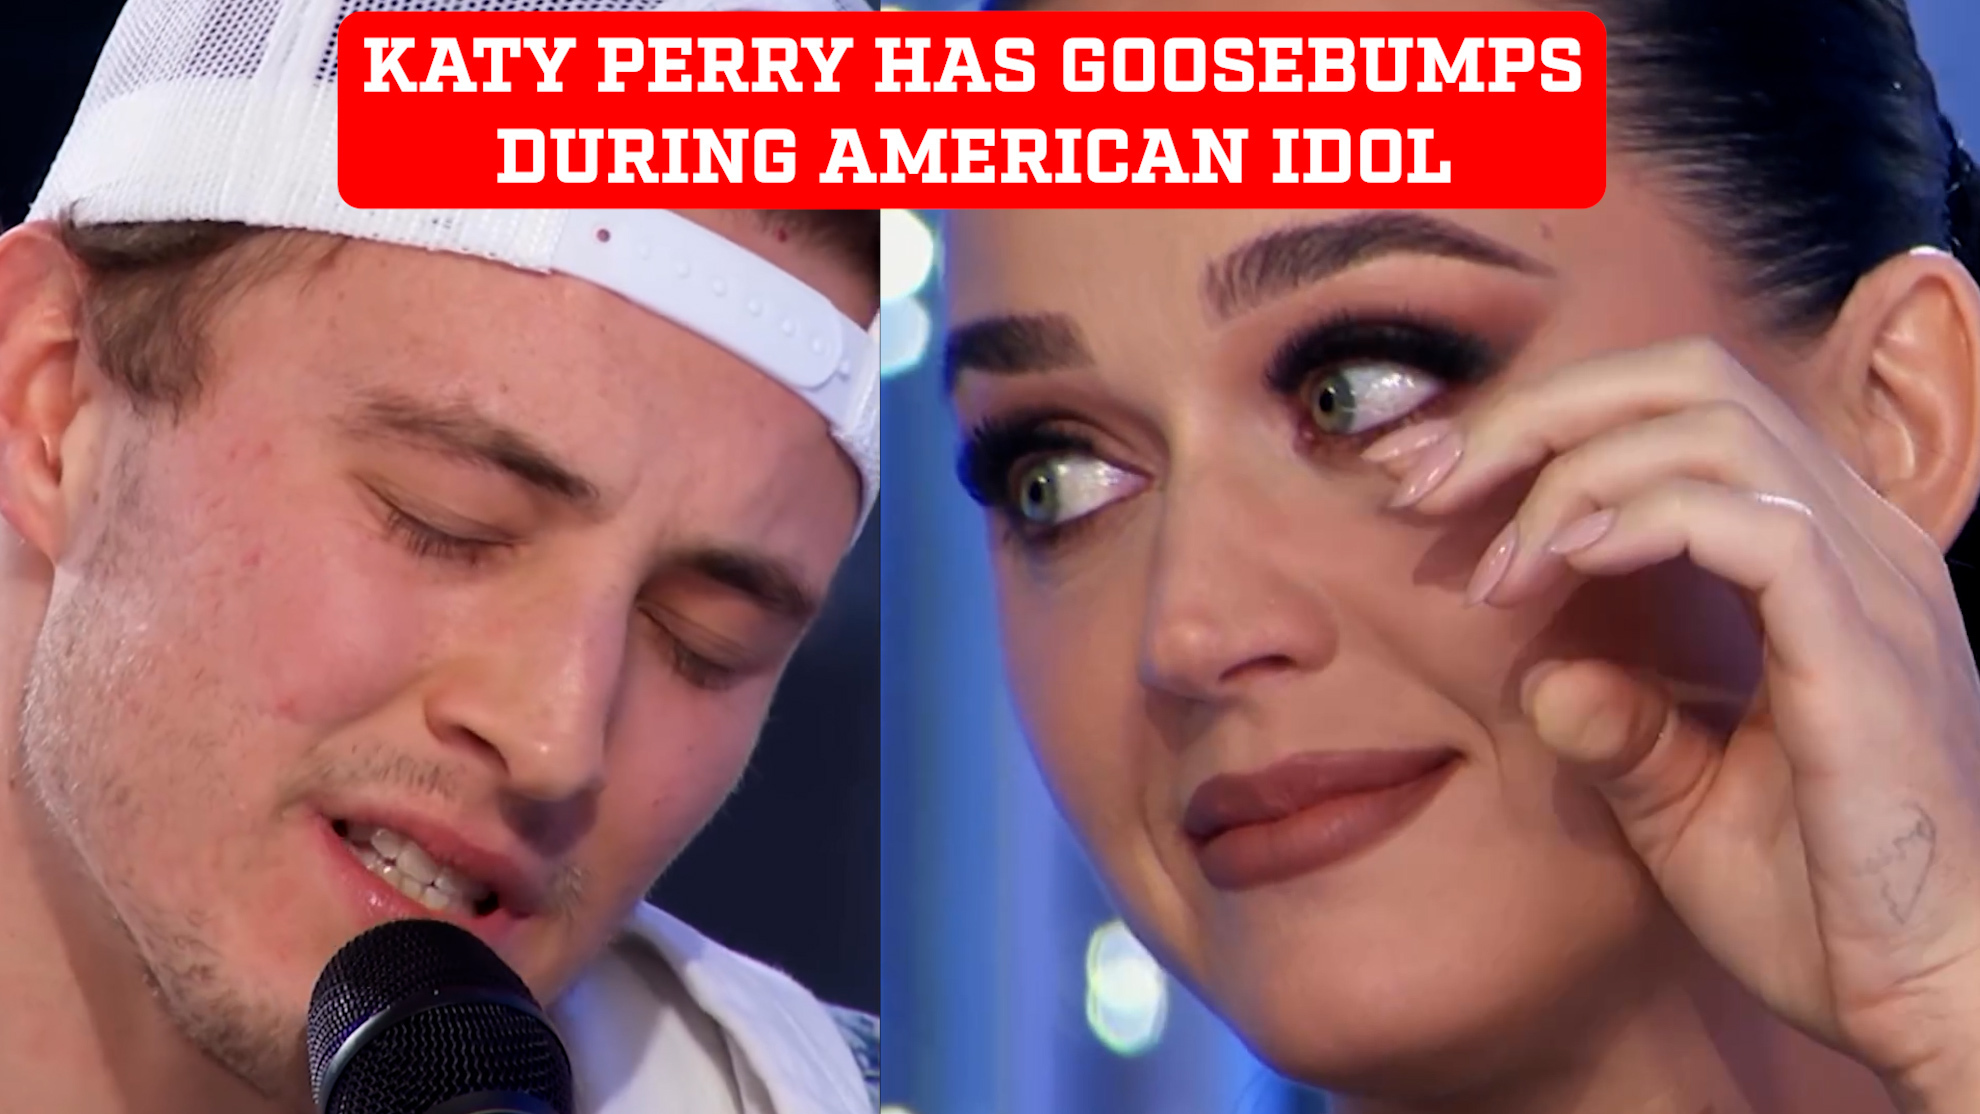 Katy Perry has goosebumps during American Idol audition